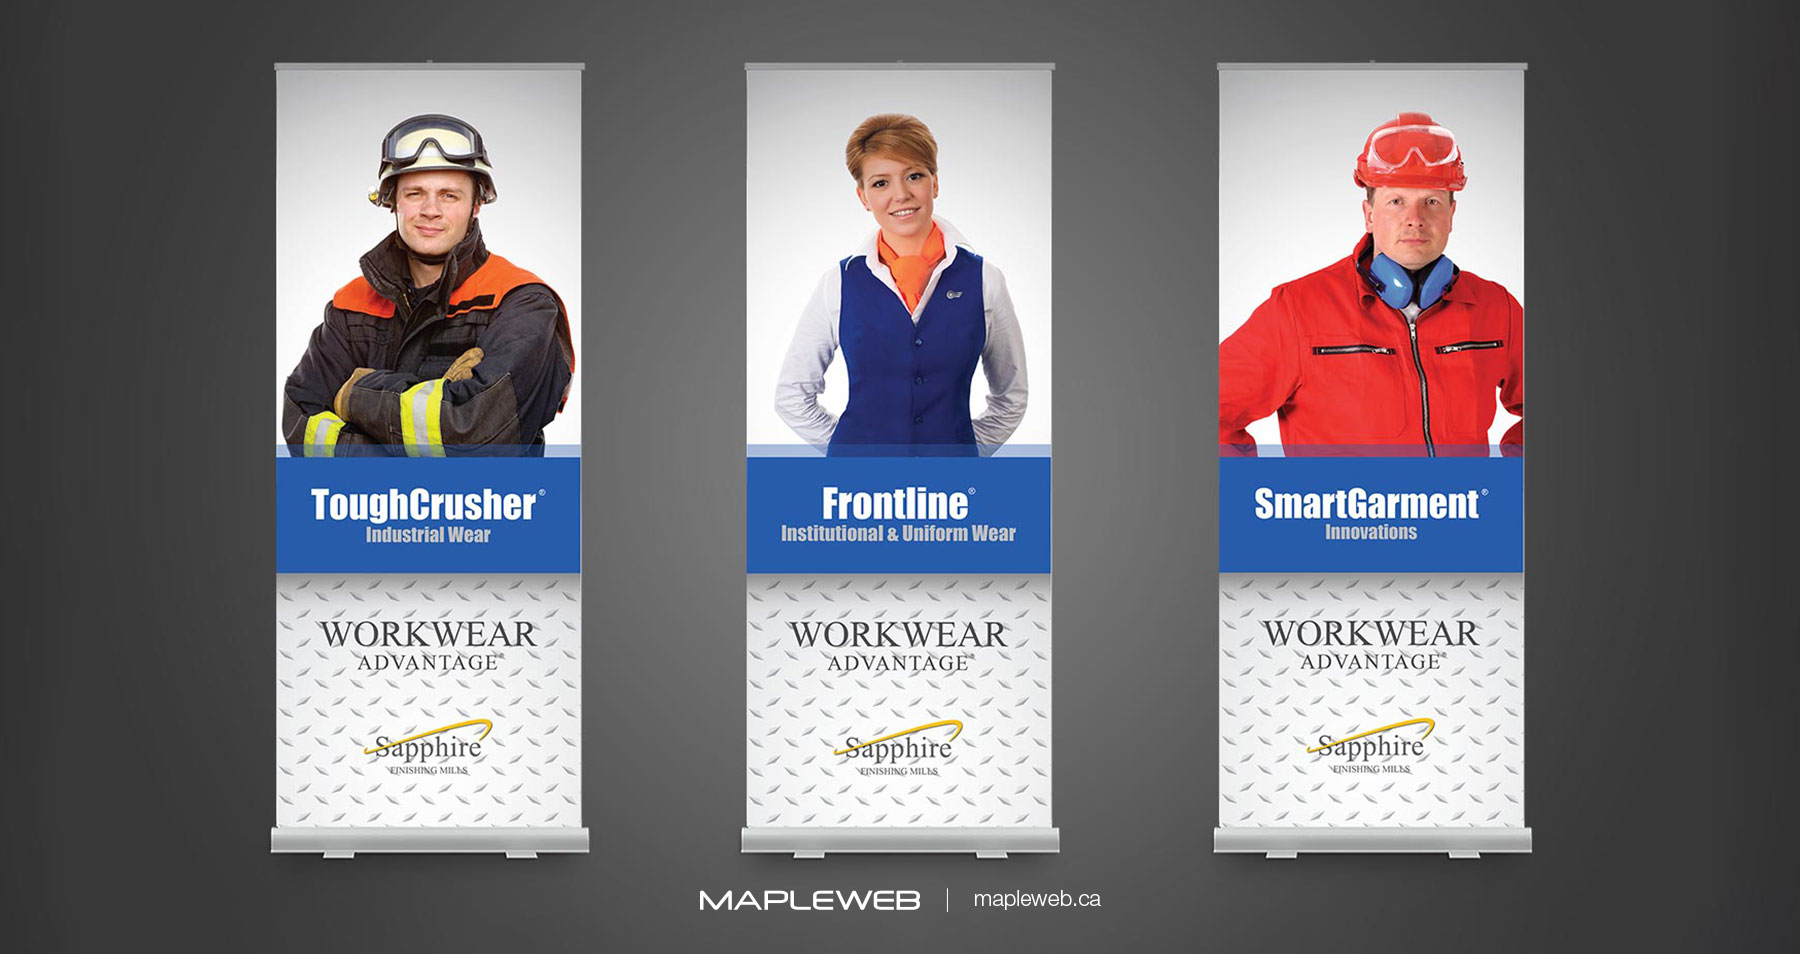 Sapphire Brand design by Mapleweb Rollup Banners displaying Workwear Designs